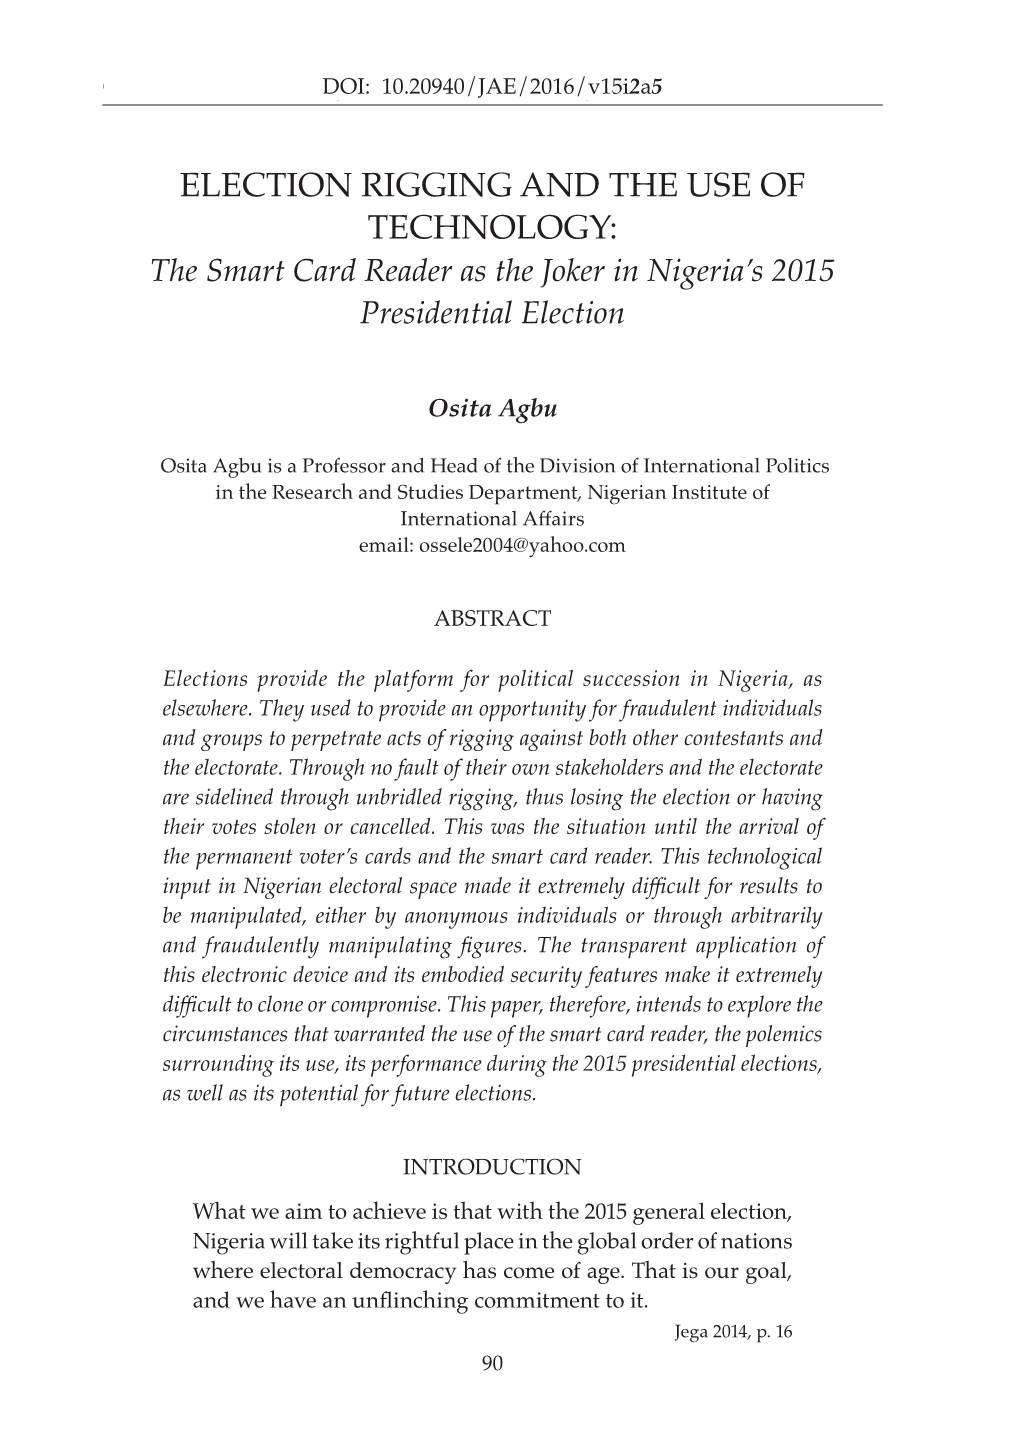 ELECTION RIGGING and the USE of TECHNOLOGY: the Smart Card Reader As the Joker in Nigeria’S 2015 Presidential Election